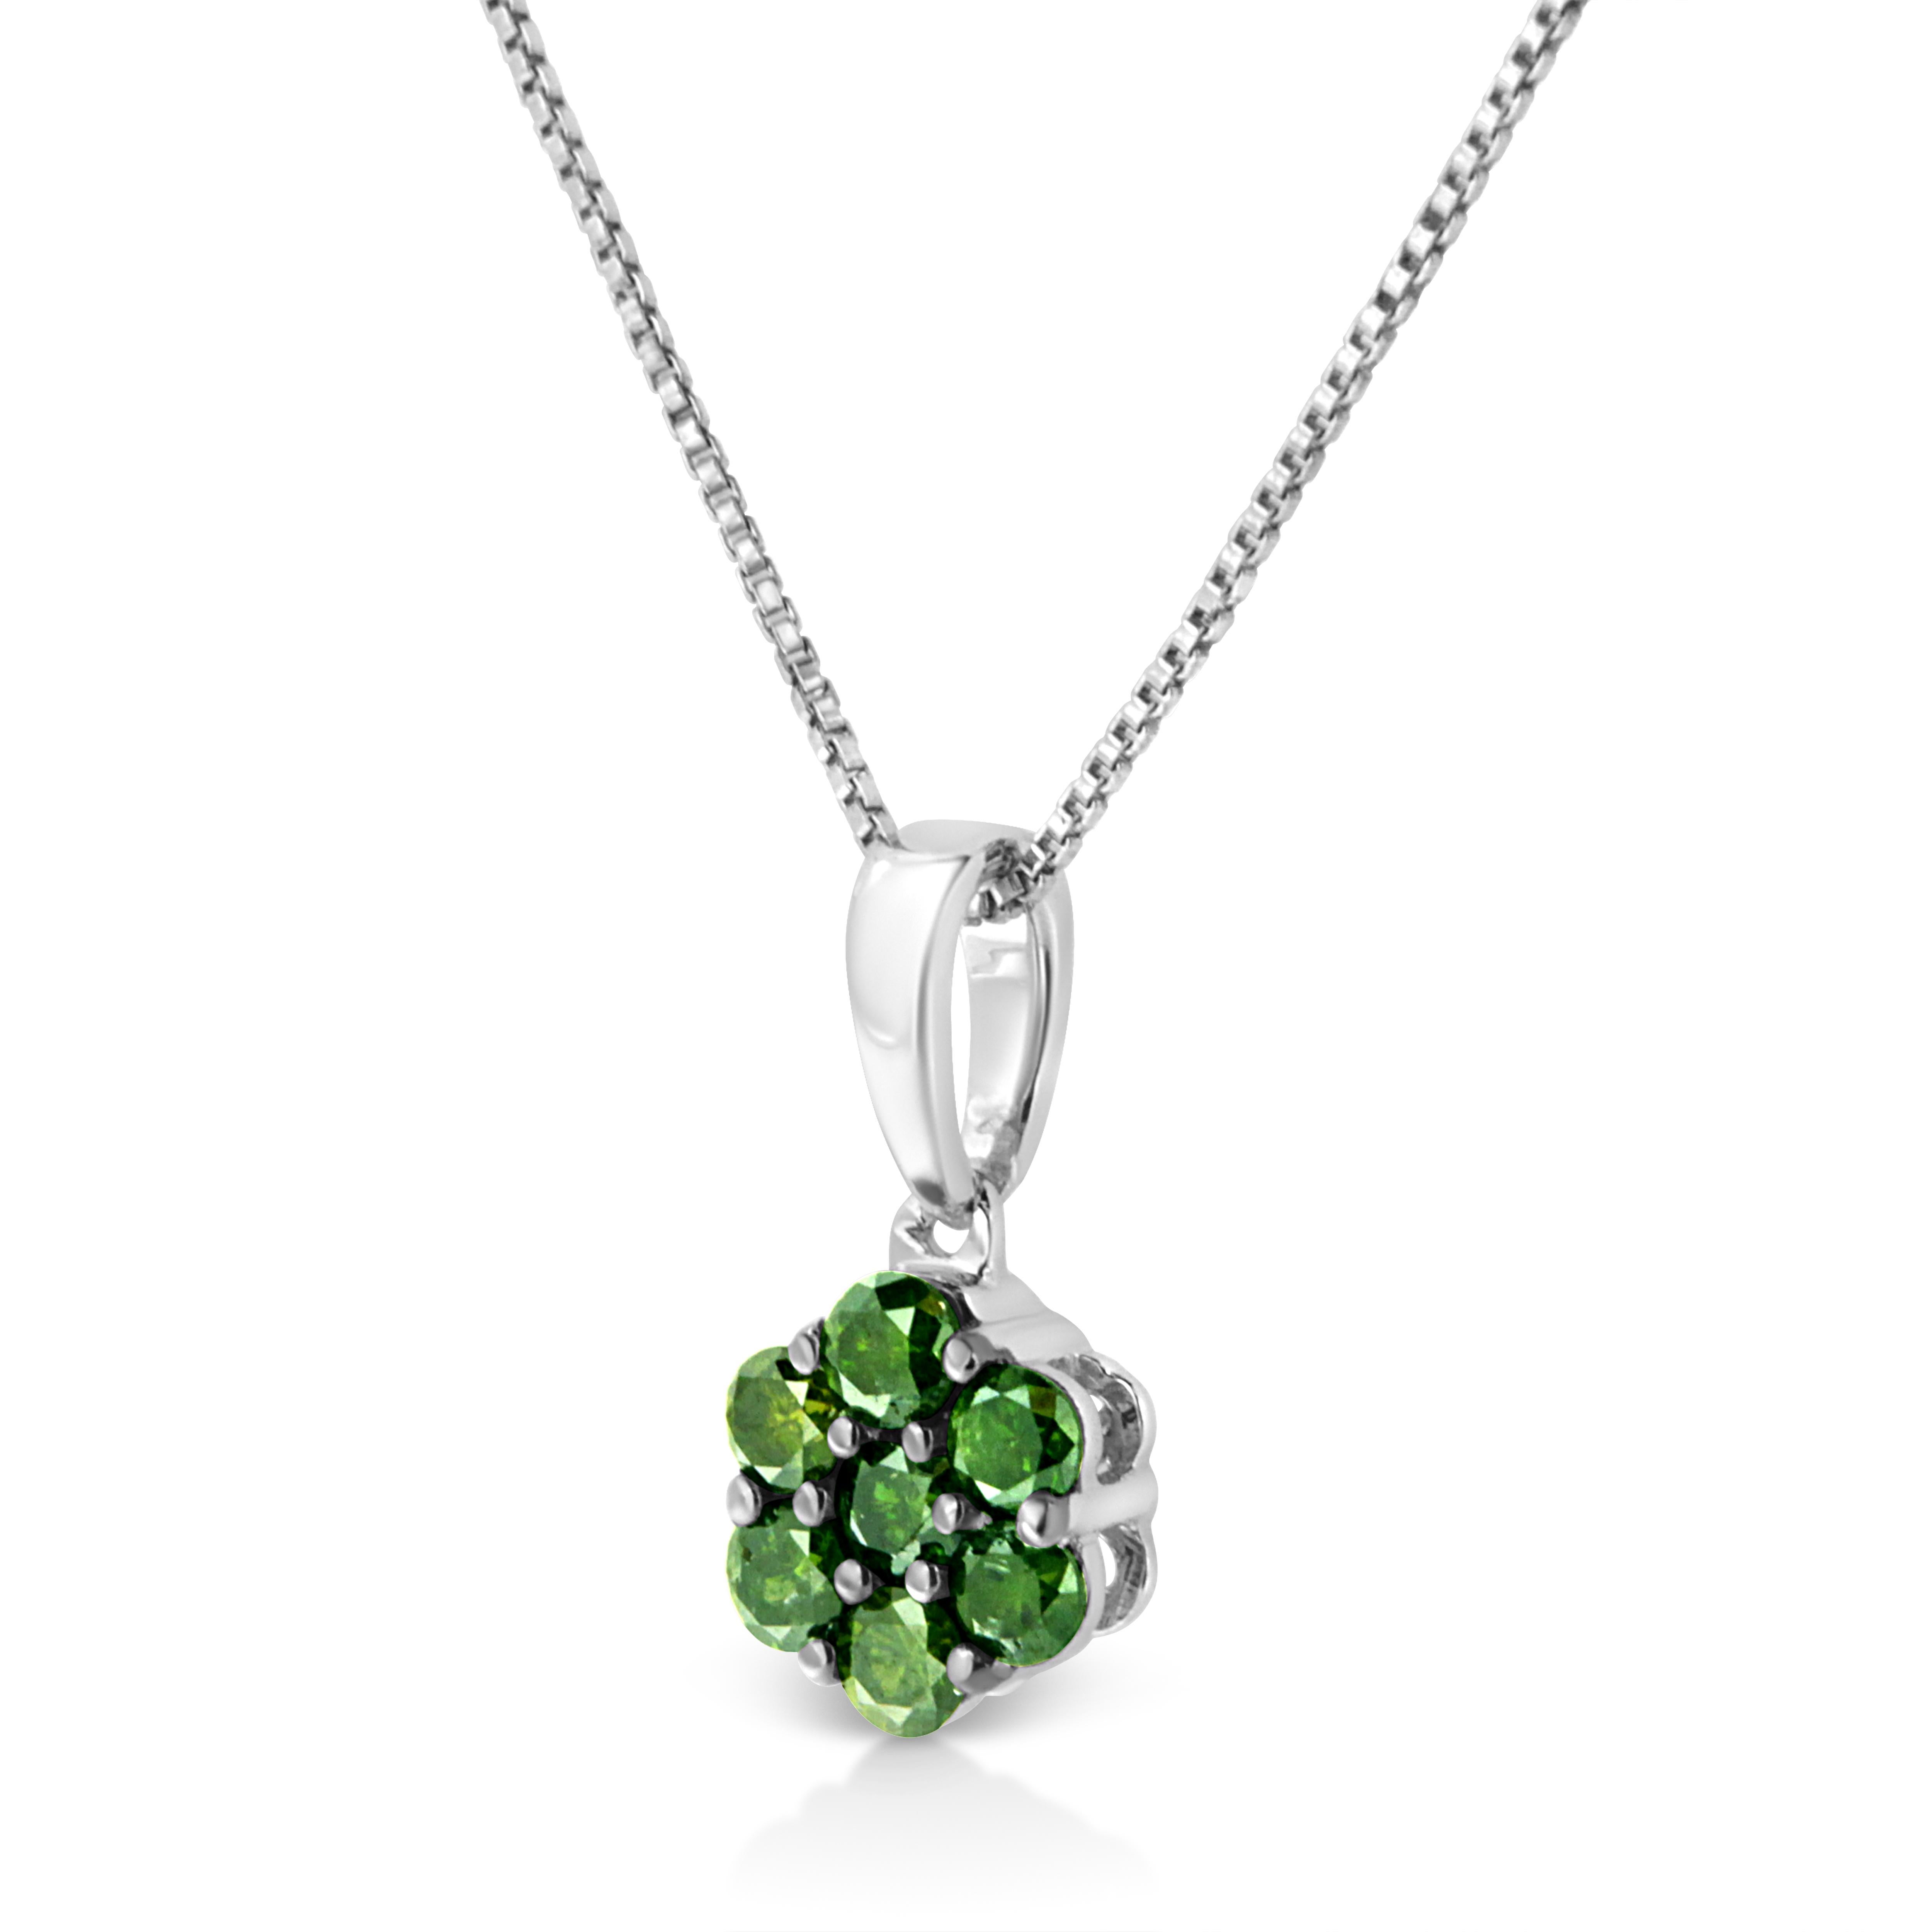 Contemporary .925 Sterling Silver 1/2 Carat Treated Green Diamond Cluster Pendant Necklace